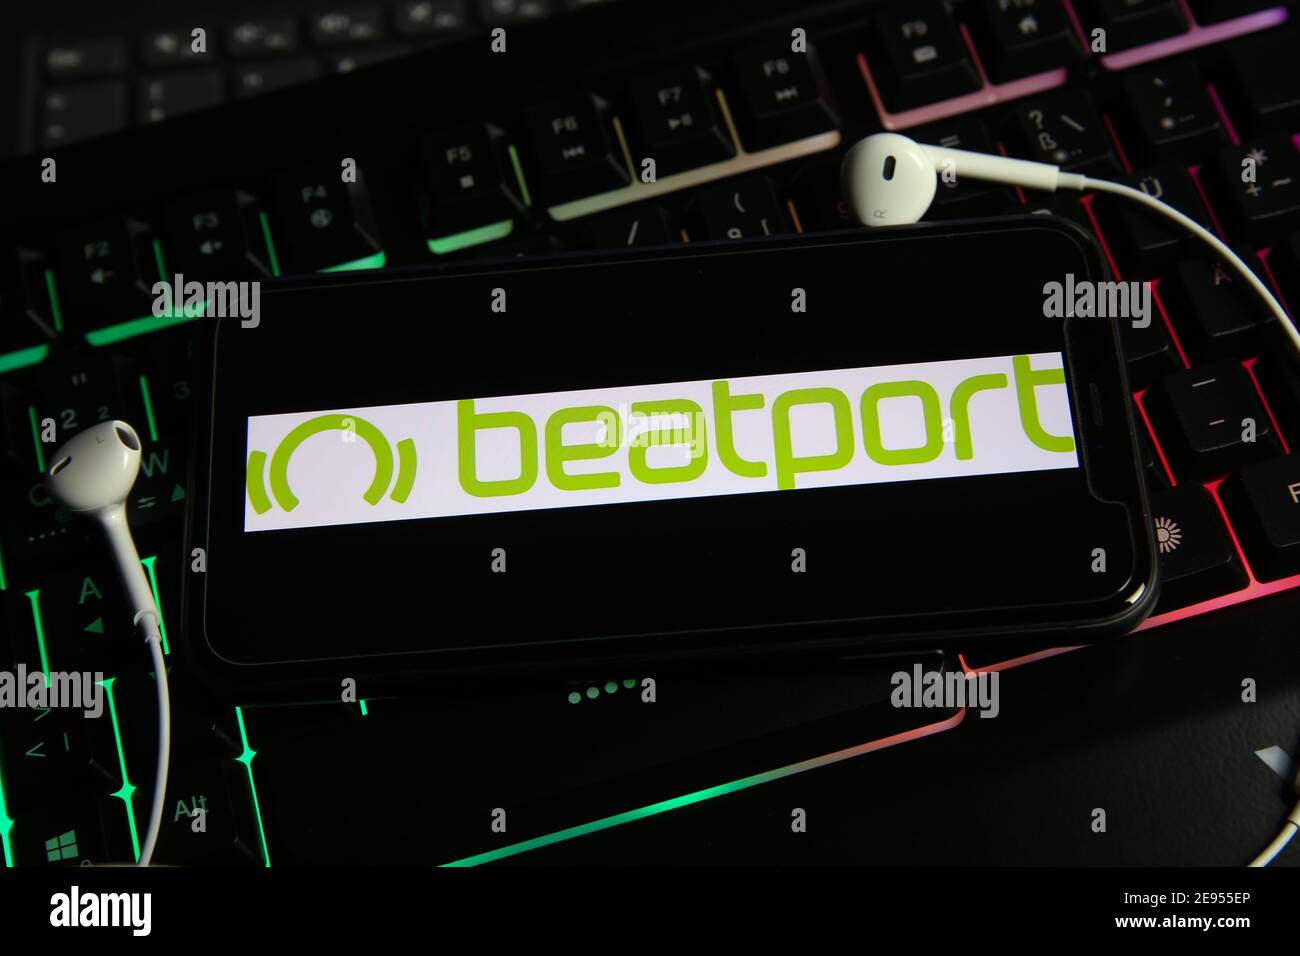 Viersen, Germany - January 9. 2021: Closeup of smartphone screen with logo lettering online electronic dance music streaming download service beatport Stock Photo